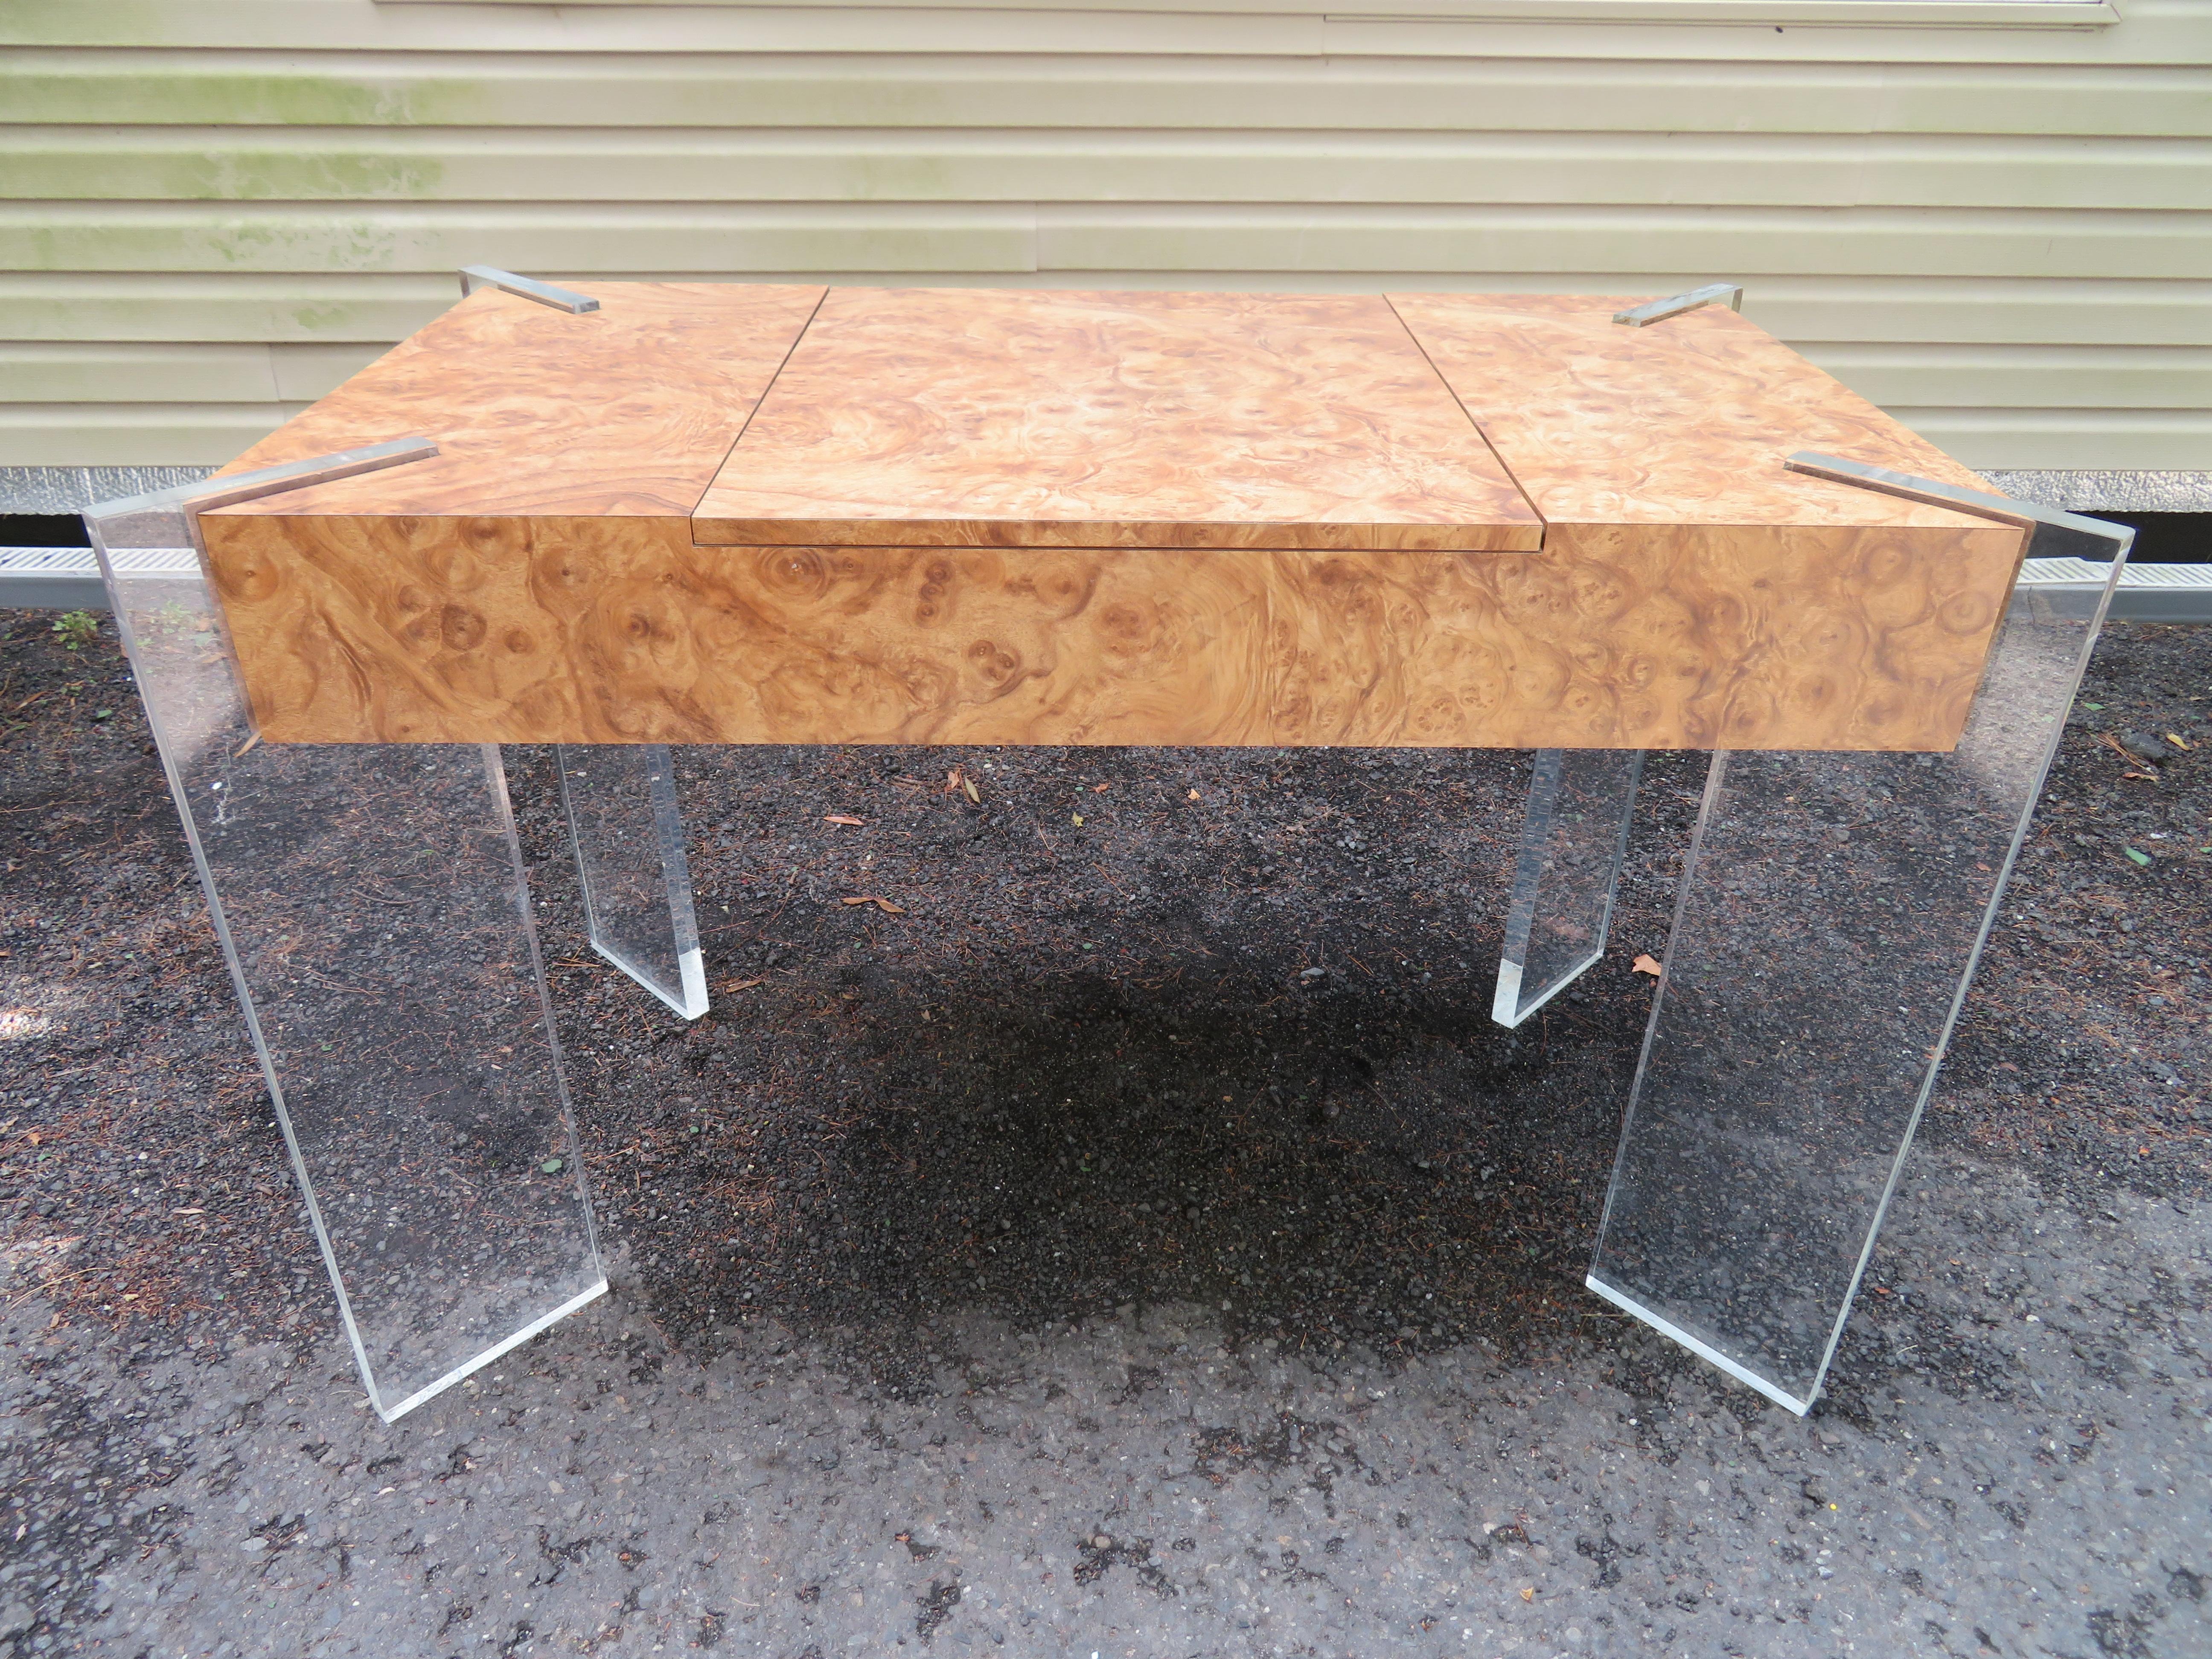 Handsomeburl laminate game table with thick Lucite slab legs. We love the burl laminate as opposed to real wood-kid and adult friendly. This piece can be used as a petite desk with removable top on and backgammon table with top off. The original